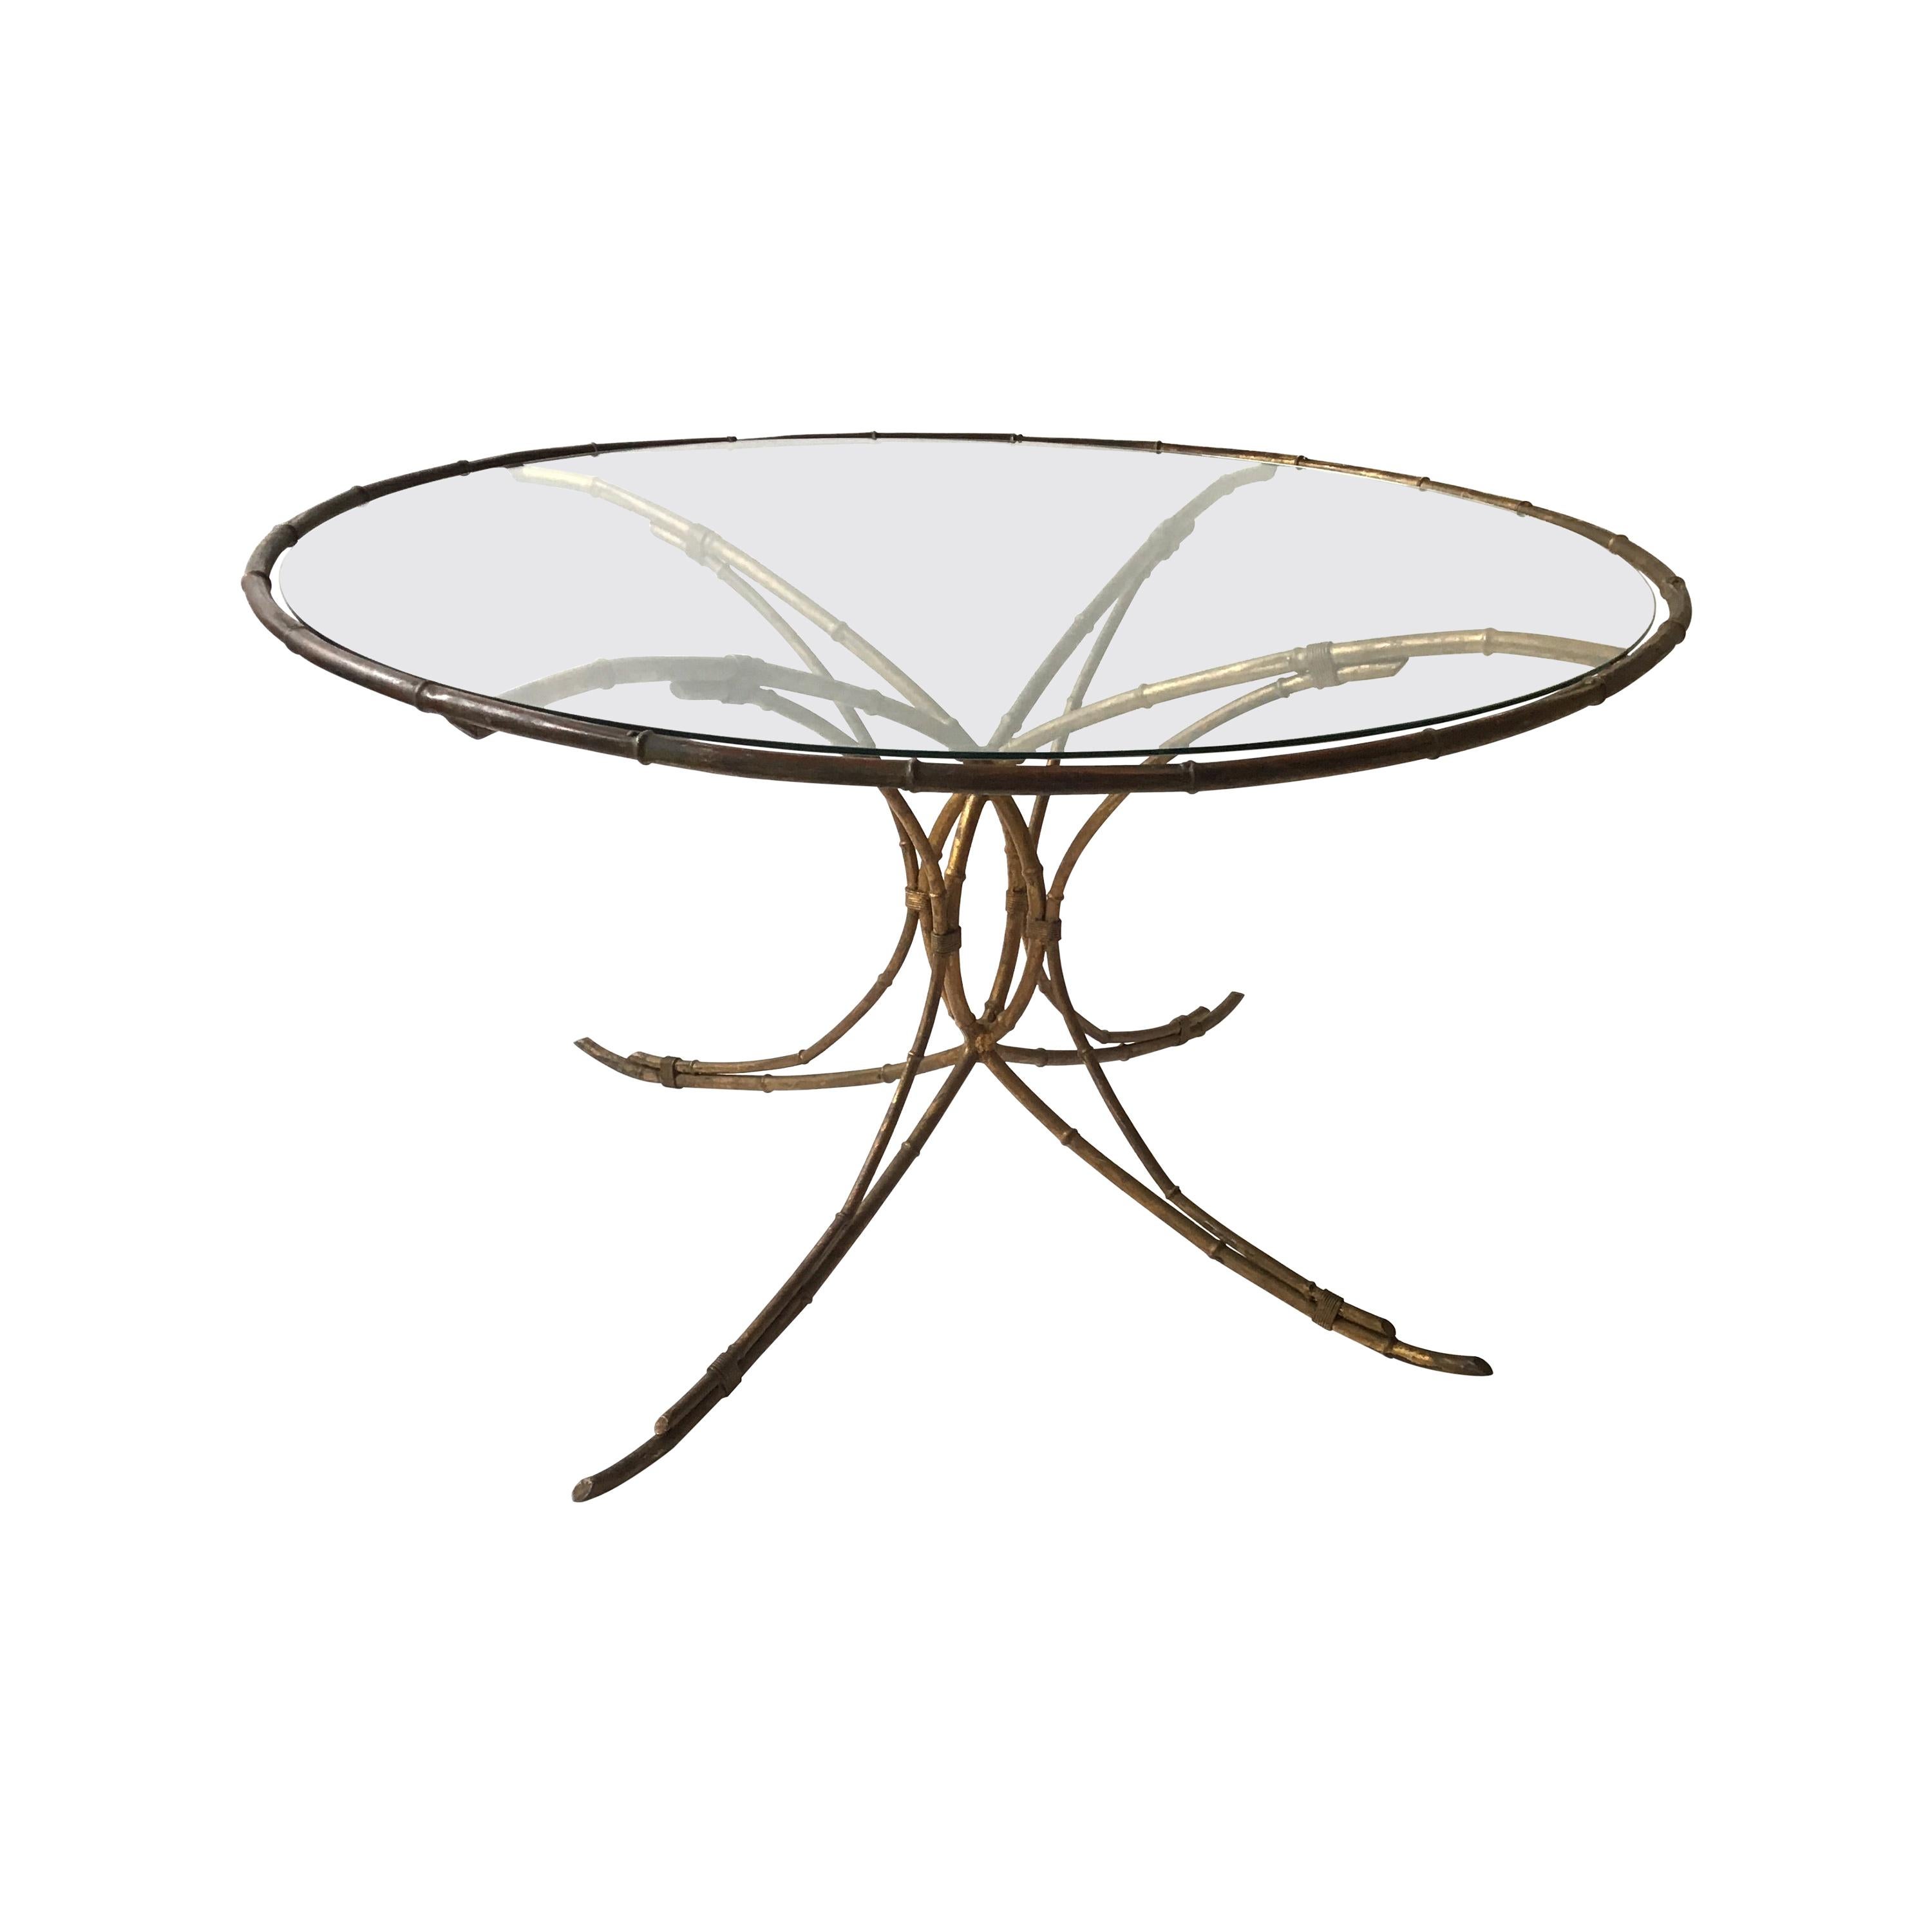 1950s Italian Gilt Metal Faux Bamboo Circular Dining Table For Sale